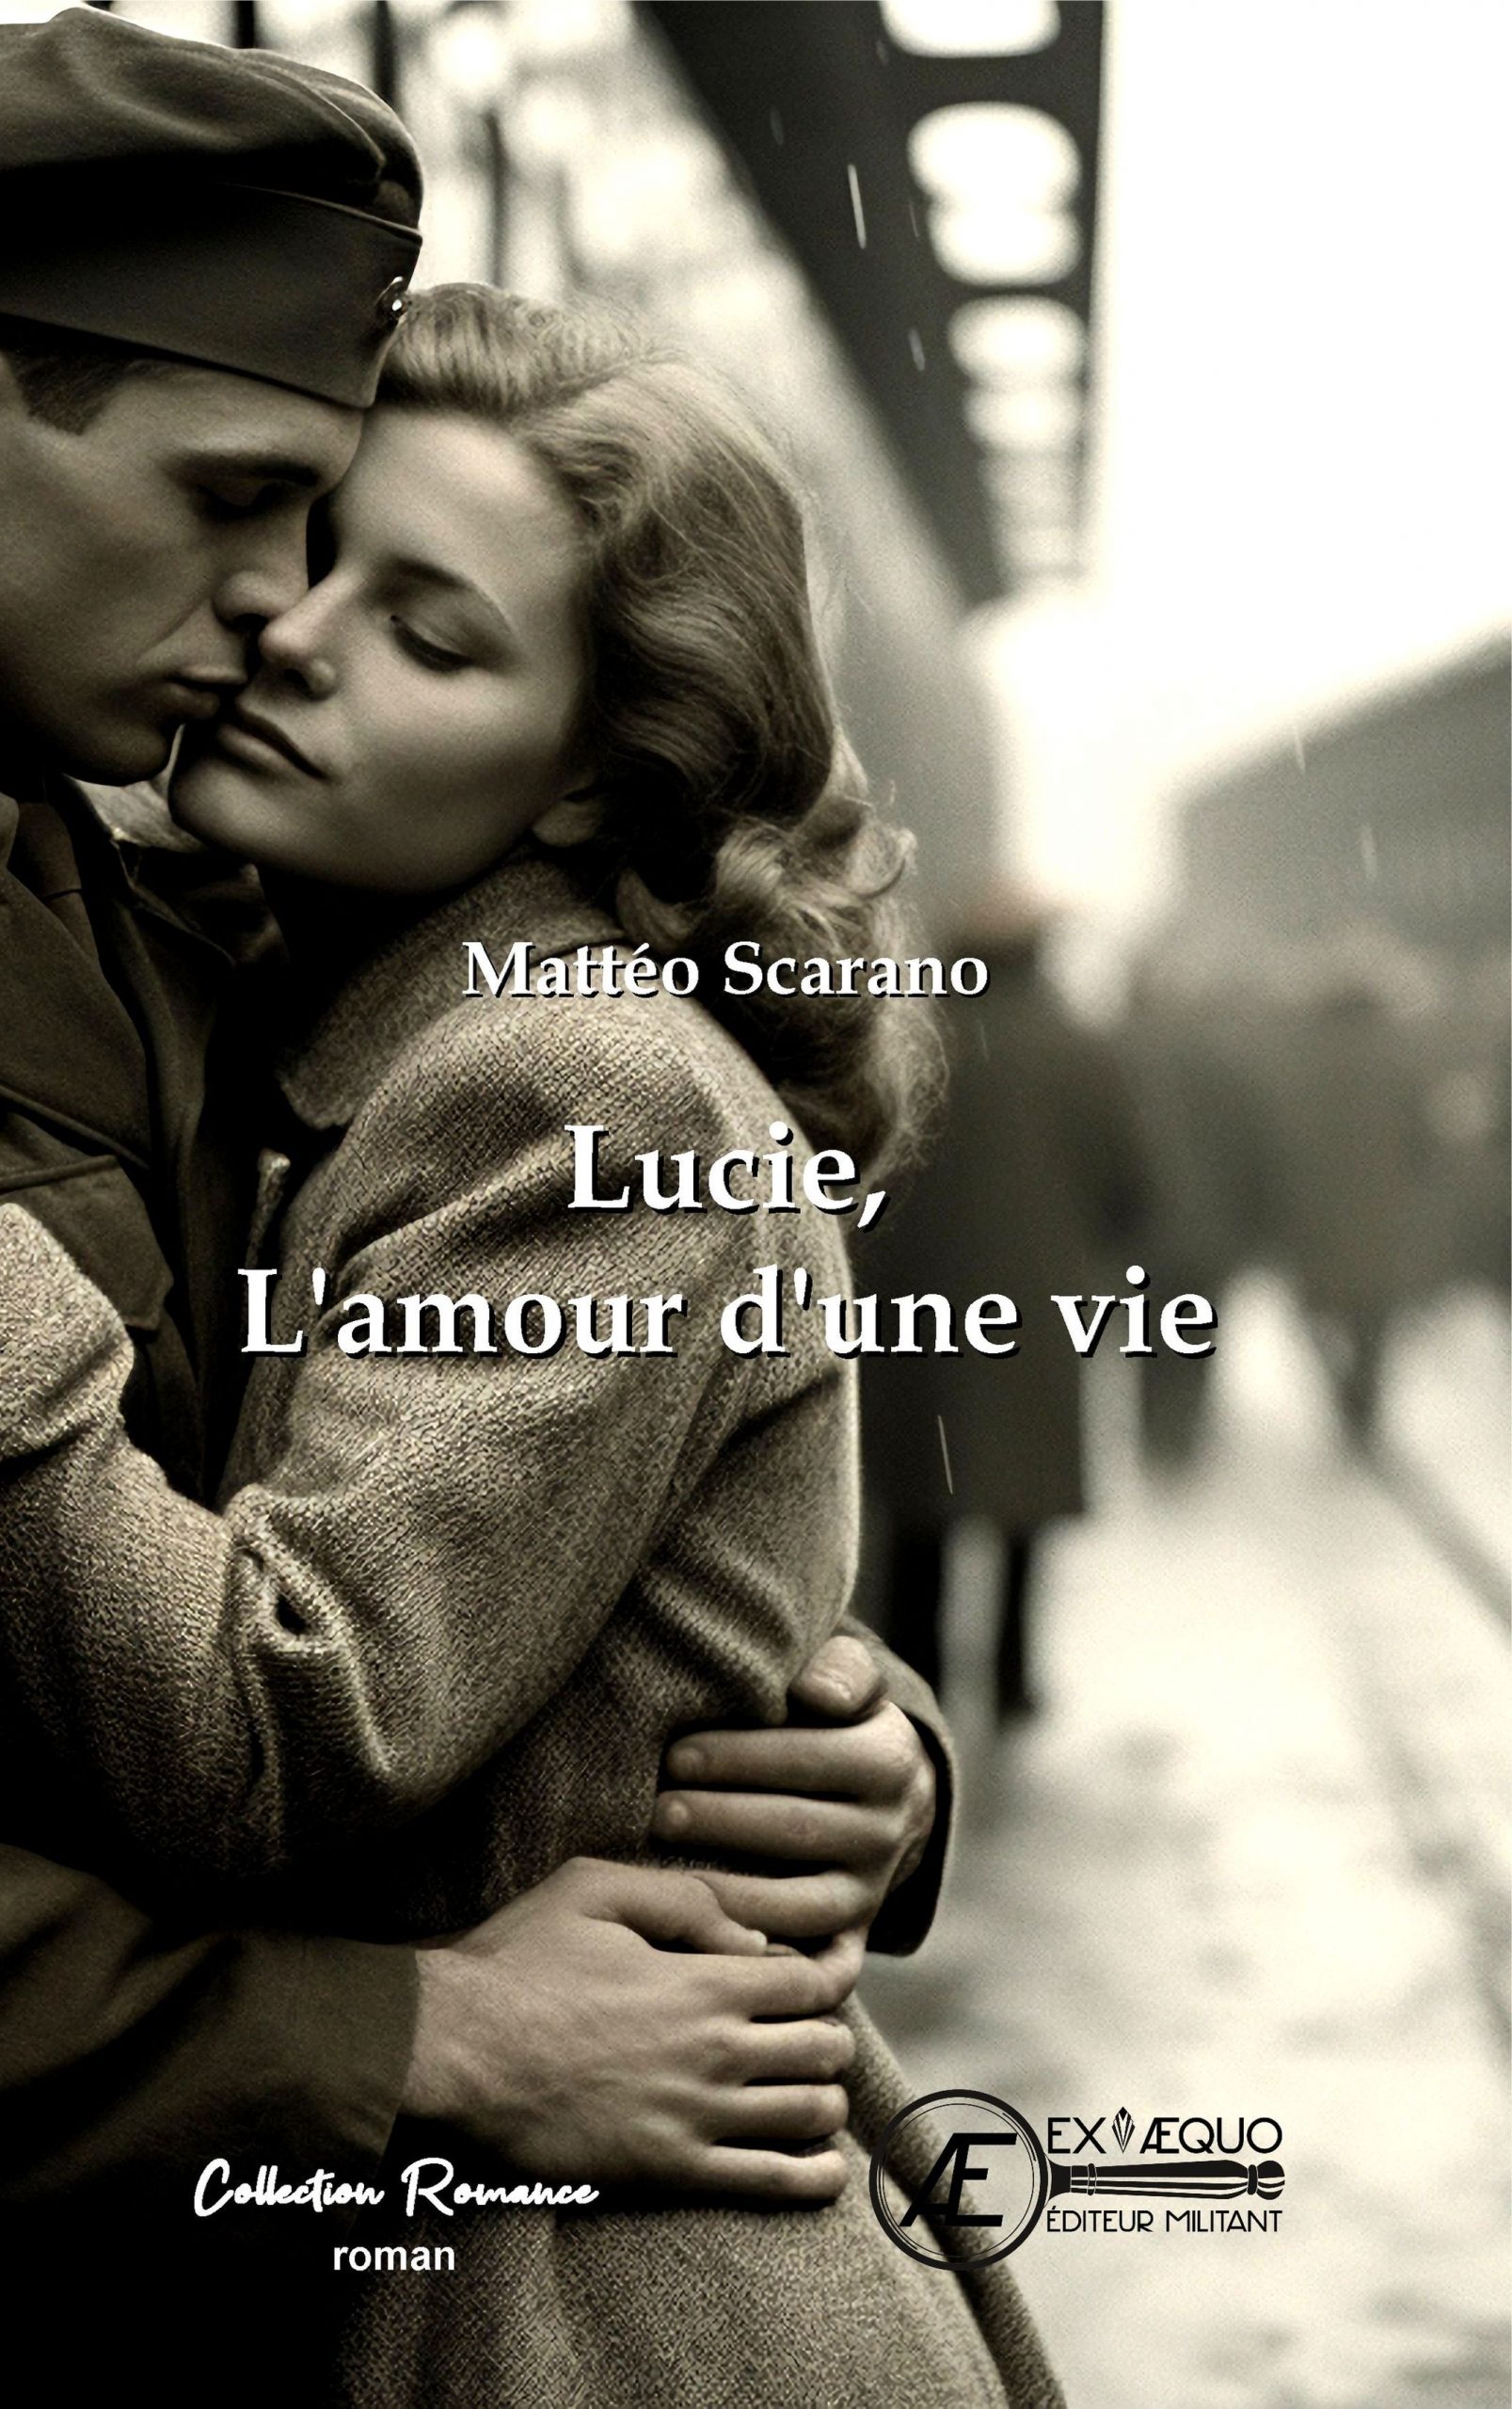 You are currently viewing Lucie, l’amour d’une vie